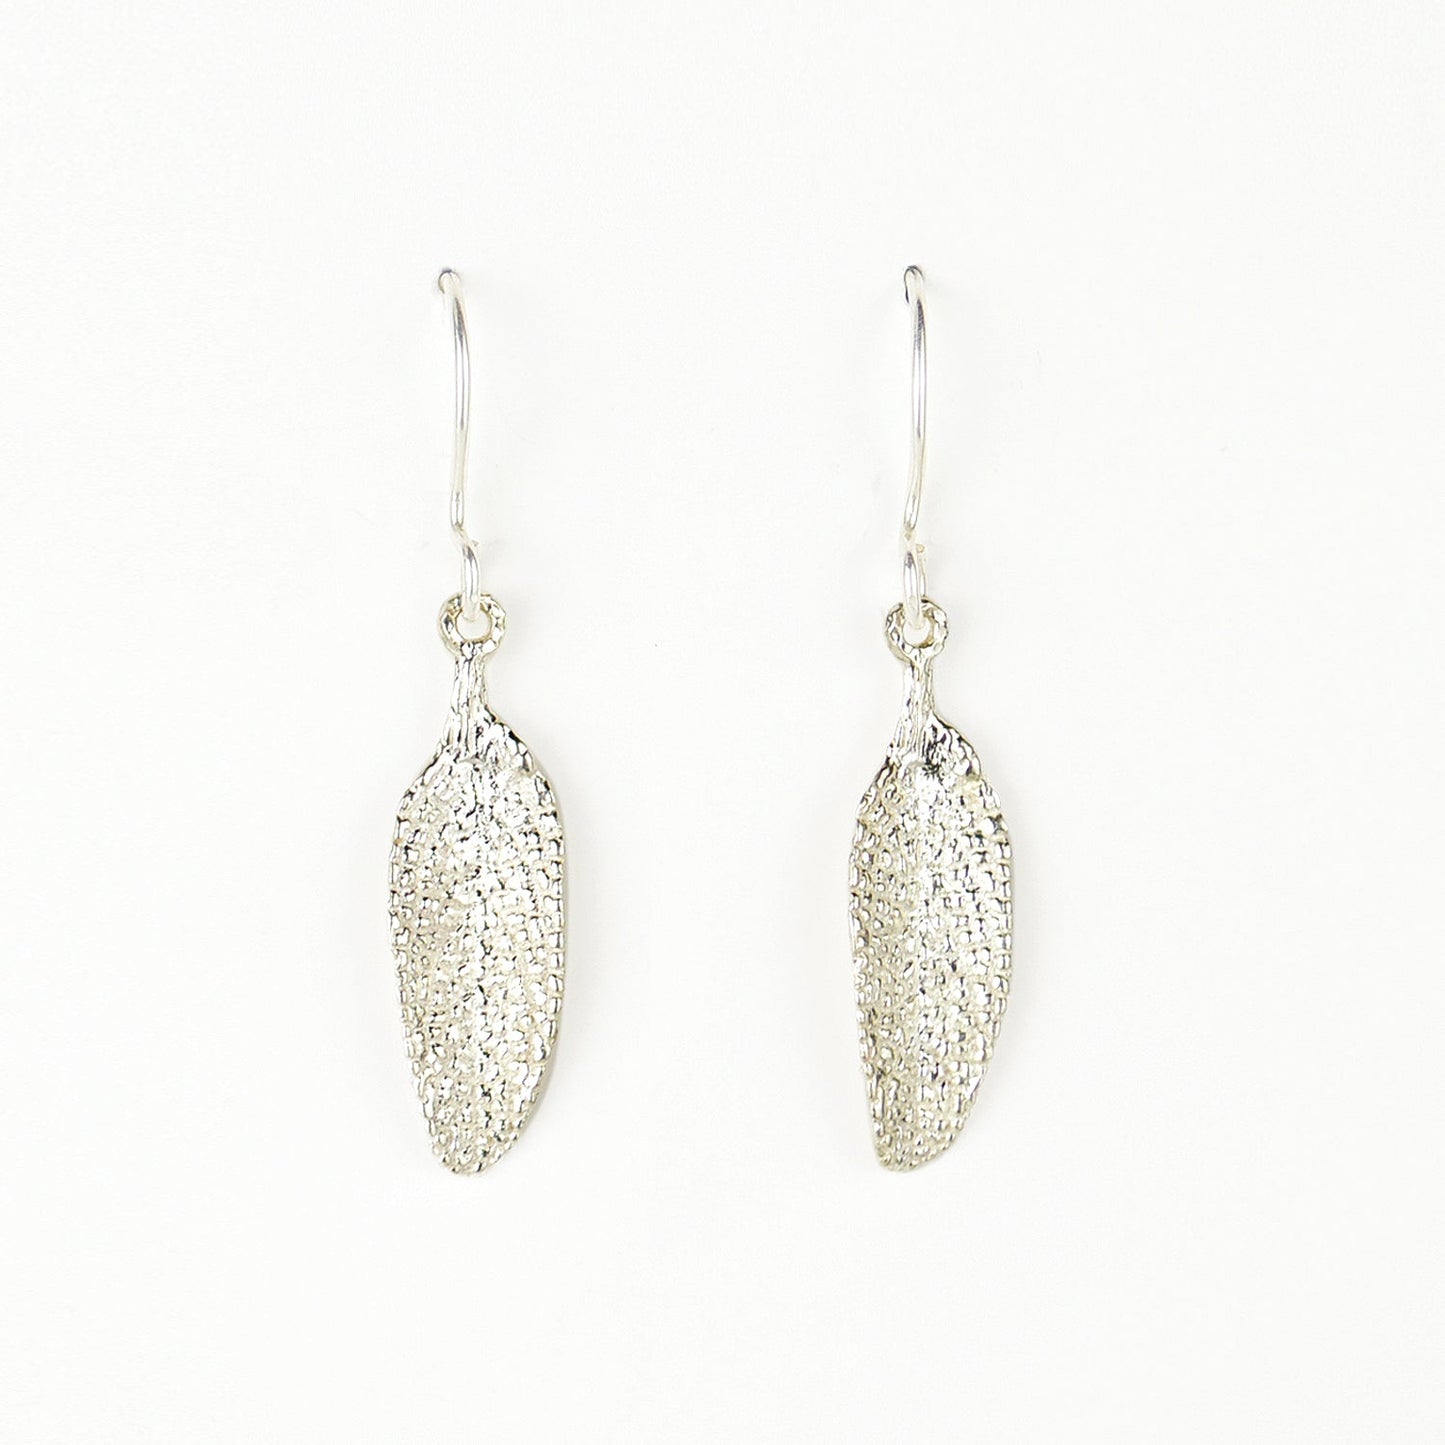 silver sage leaf earrings on plain white background. incredible detail